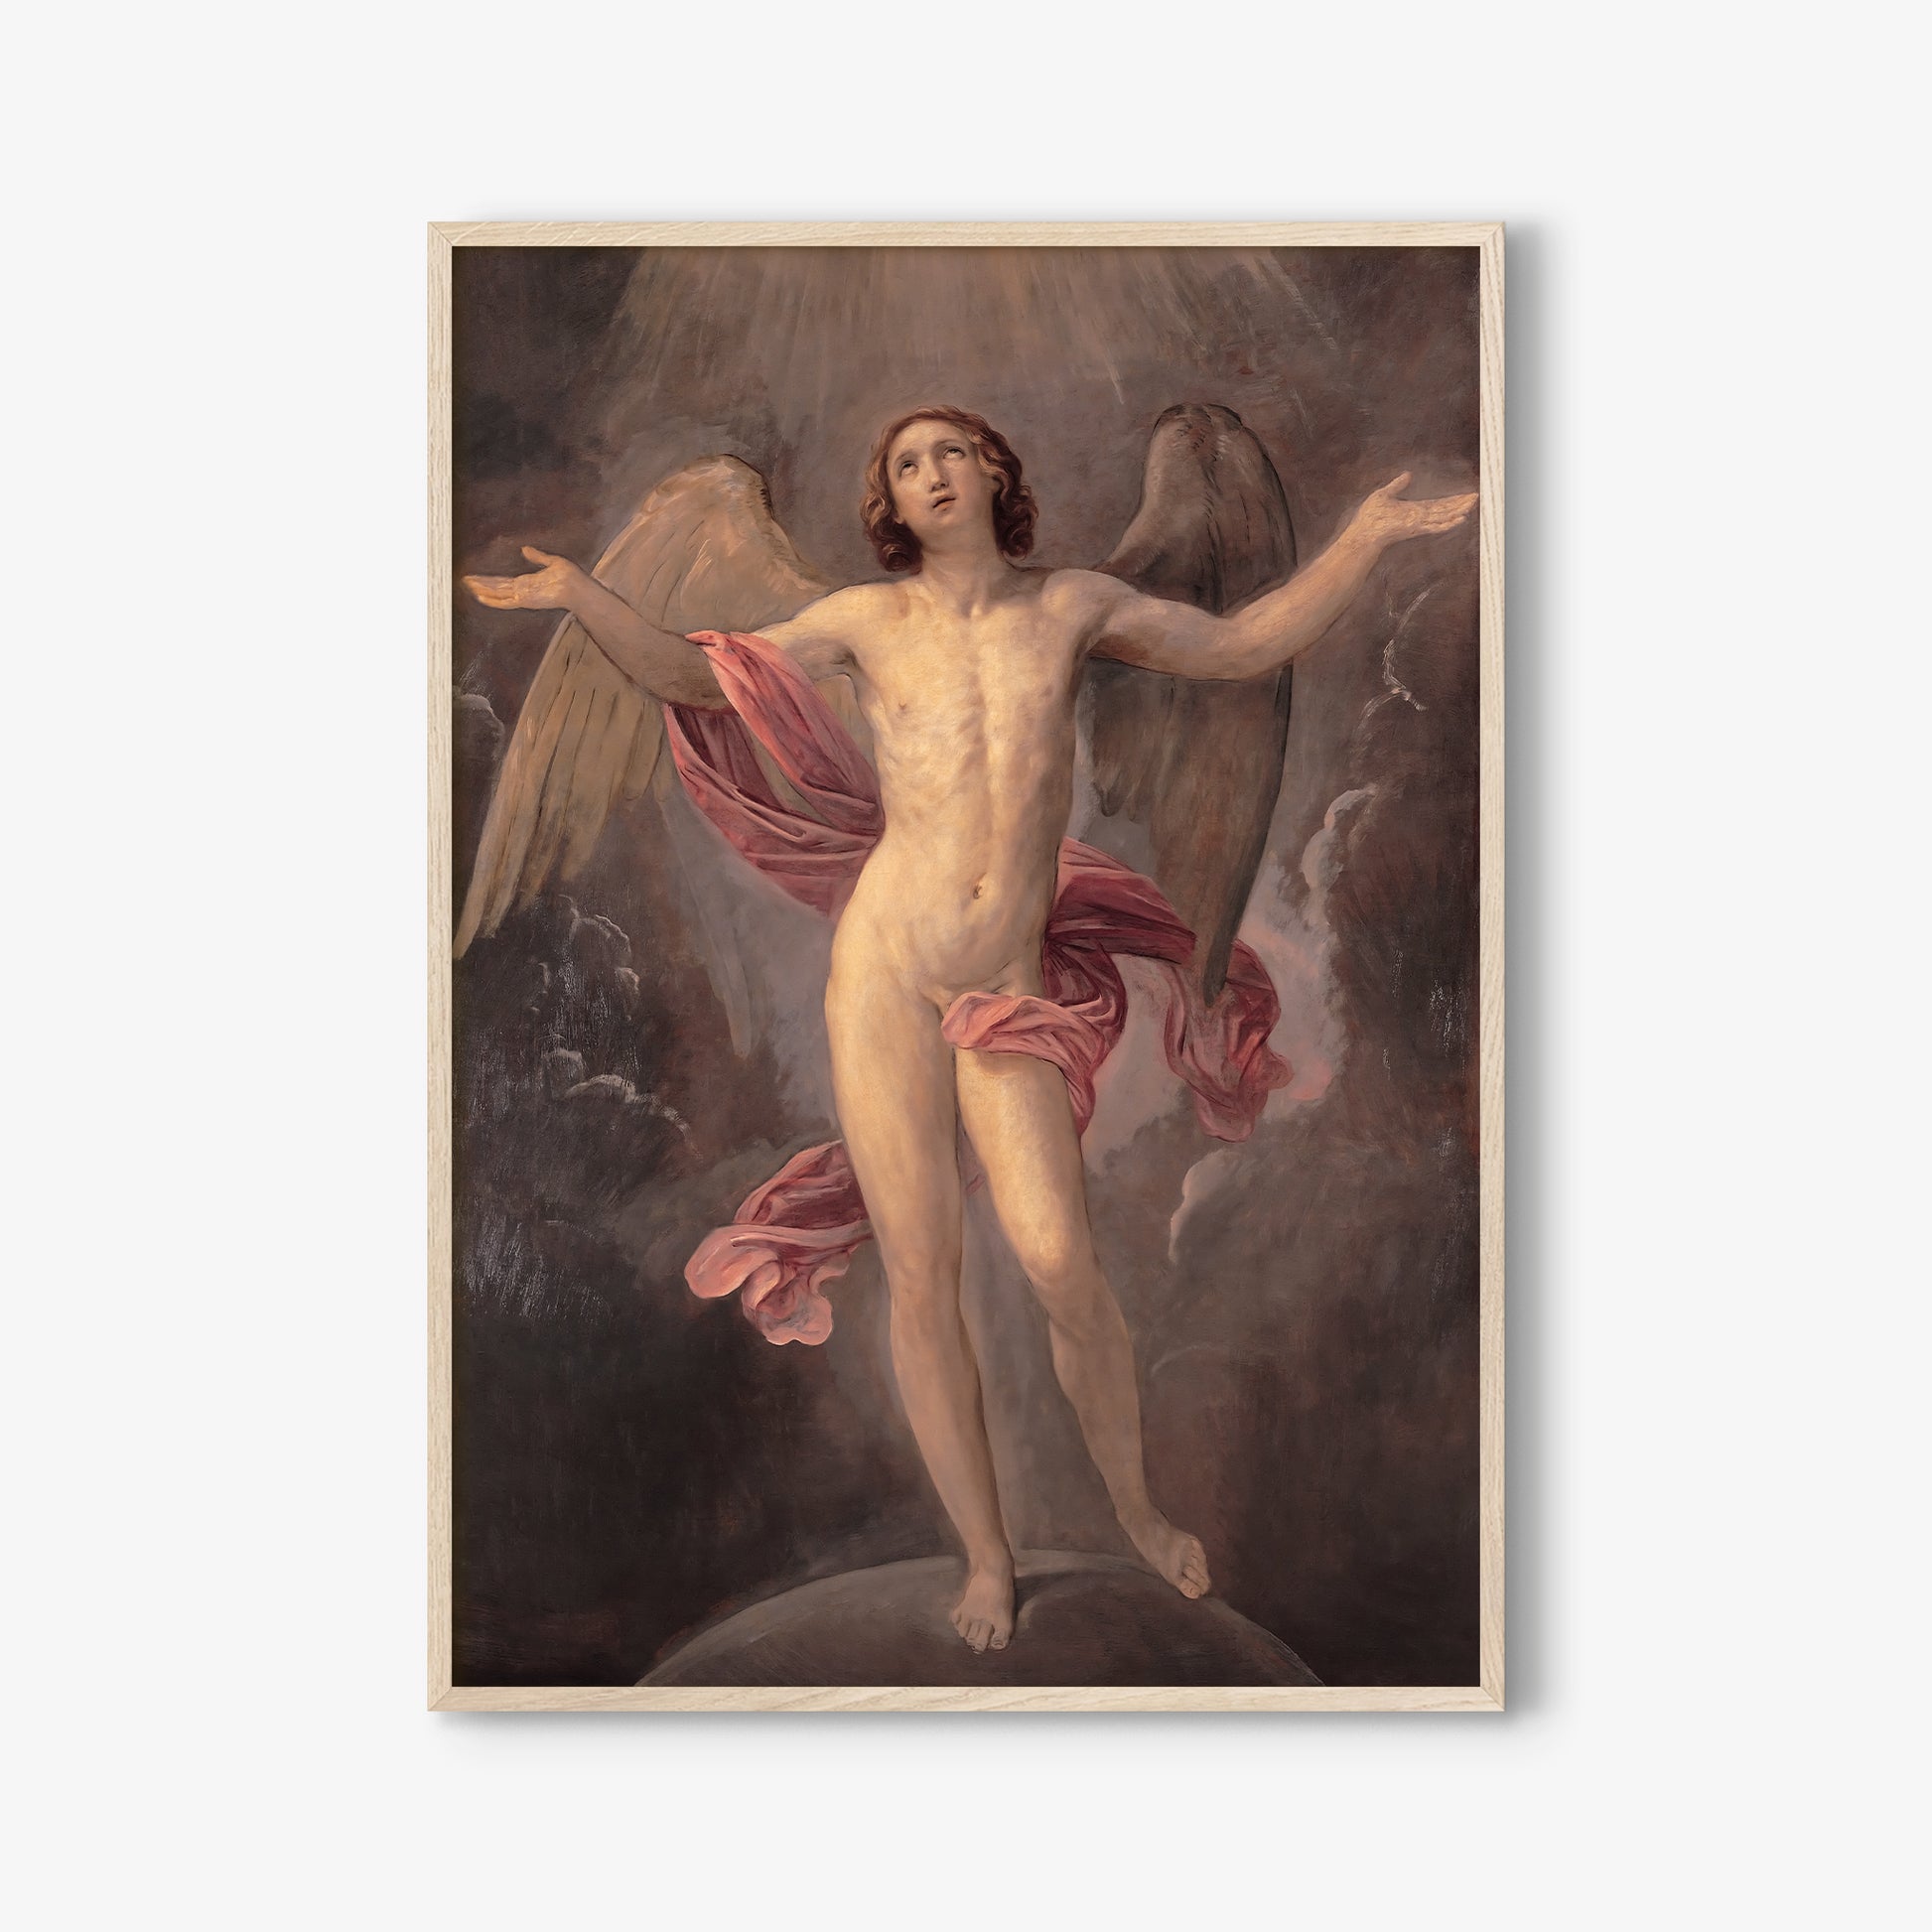 Be inspired by our classic art print Blessed Soul by Guido Reni. This artwork was printed using the giclée process on archival acid-free paper and is presented in a white oak frame that captures its timeless beauty in every detail.